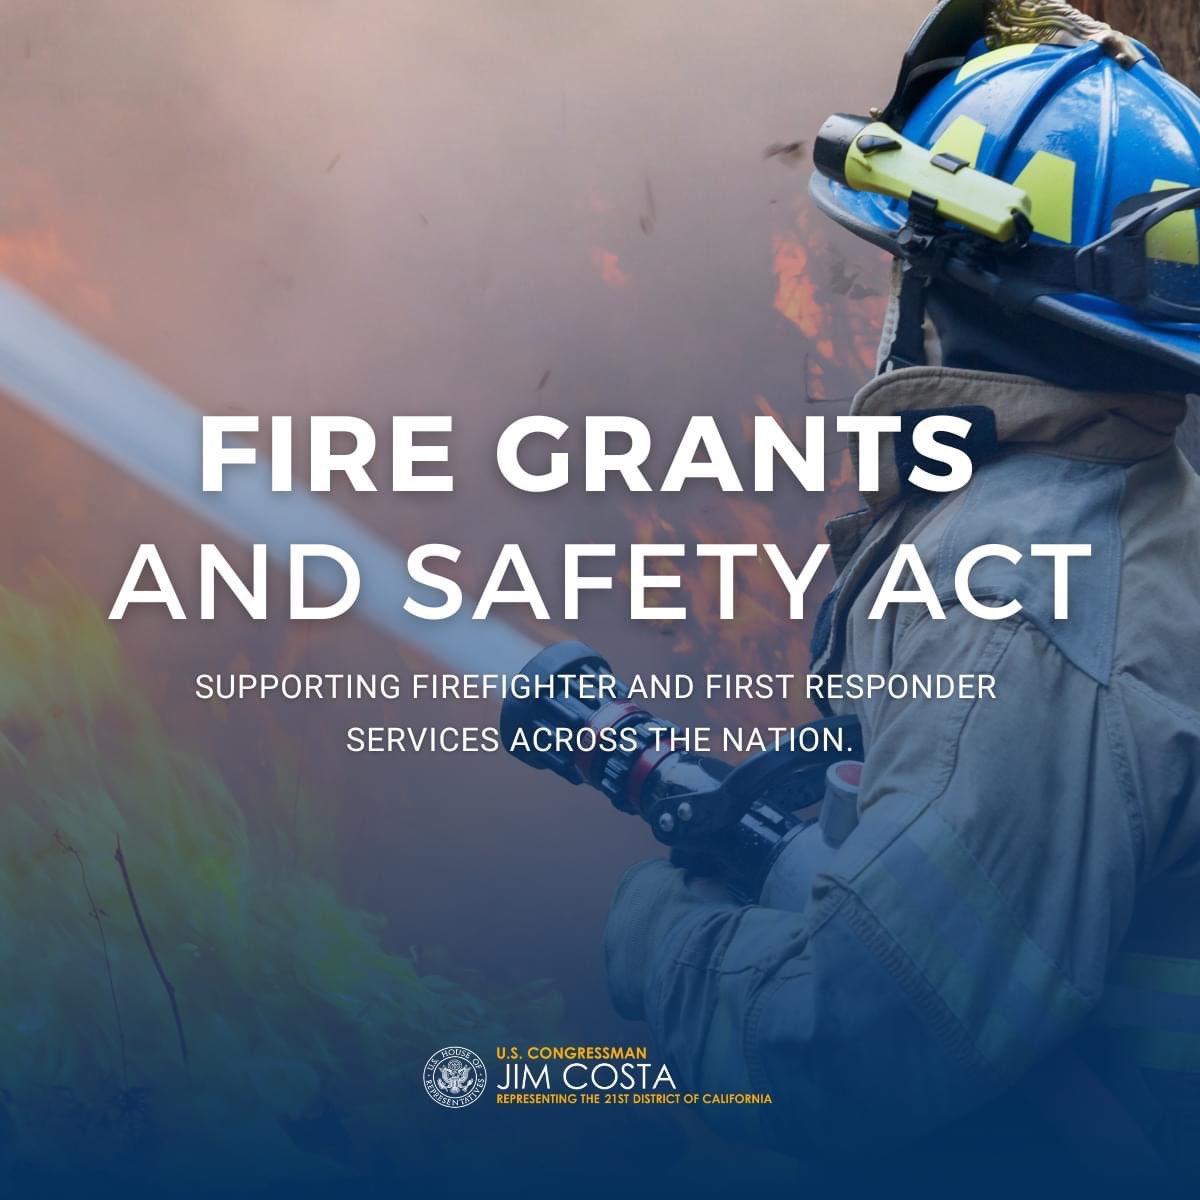 We rely on firefighters to respond to emergencies and protect our community, it's essential that we support them with the resources they need. That's why I'm backing the Fire Grants and Safety Act. Let's prioritize the resources and support our firefighters need to keep us safe.